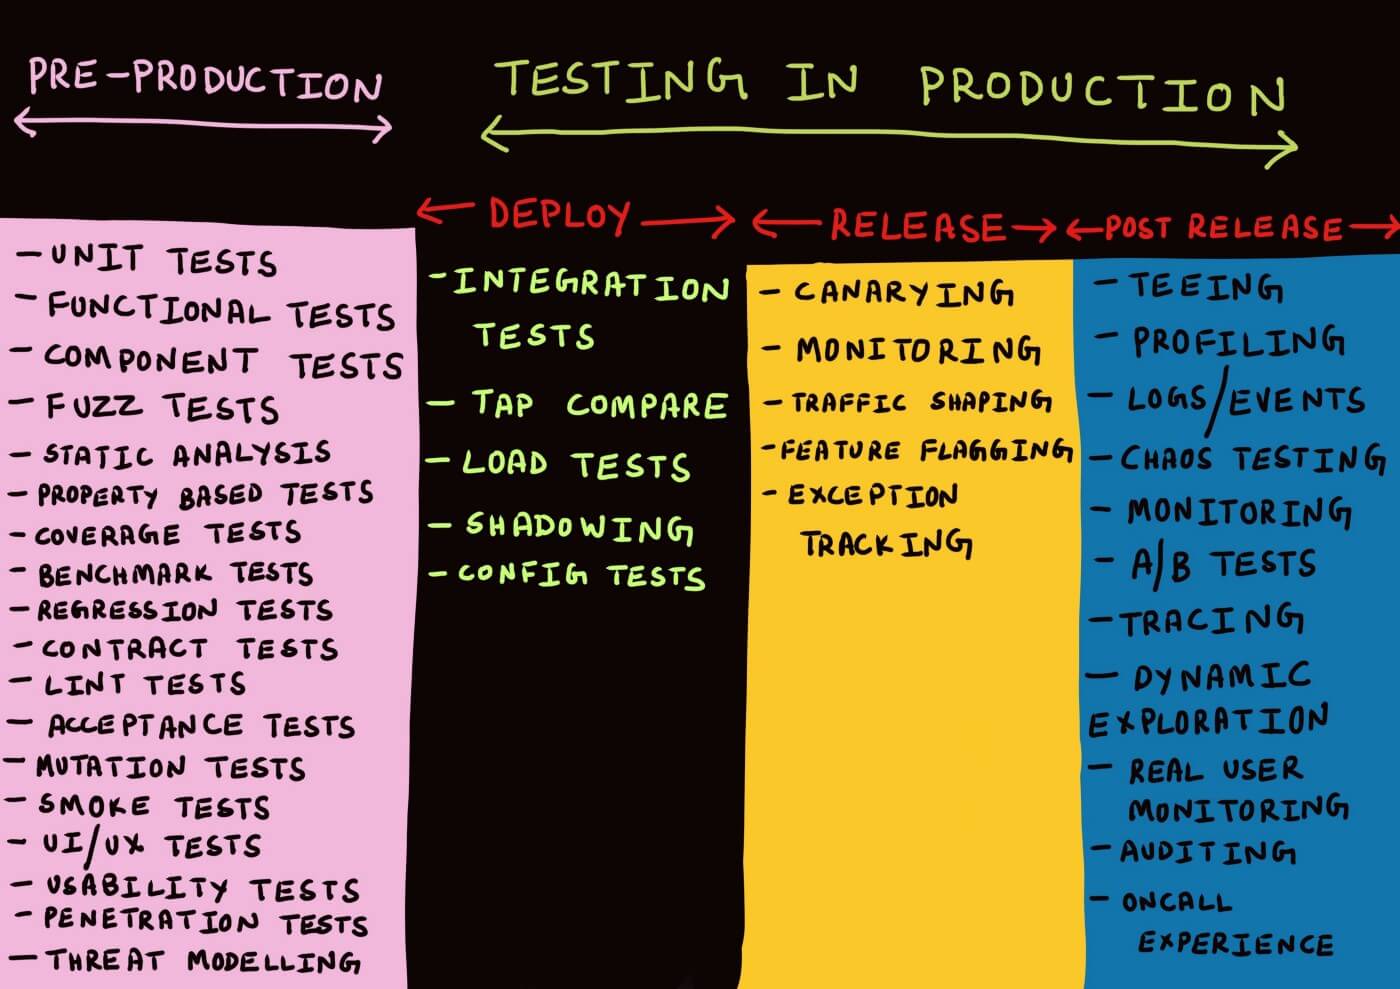 Cindy Sridharan' types of tests